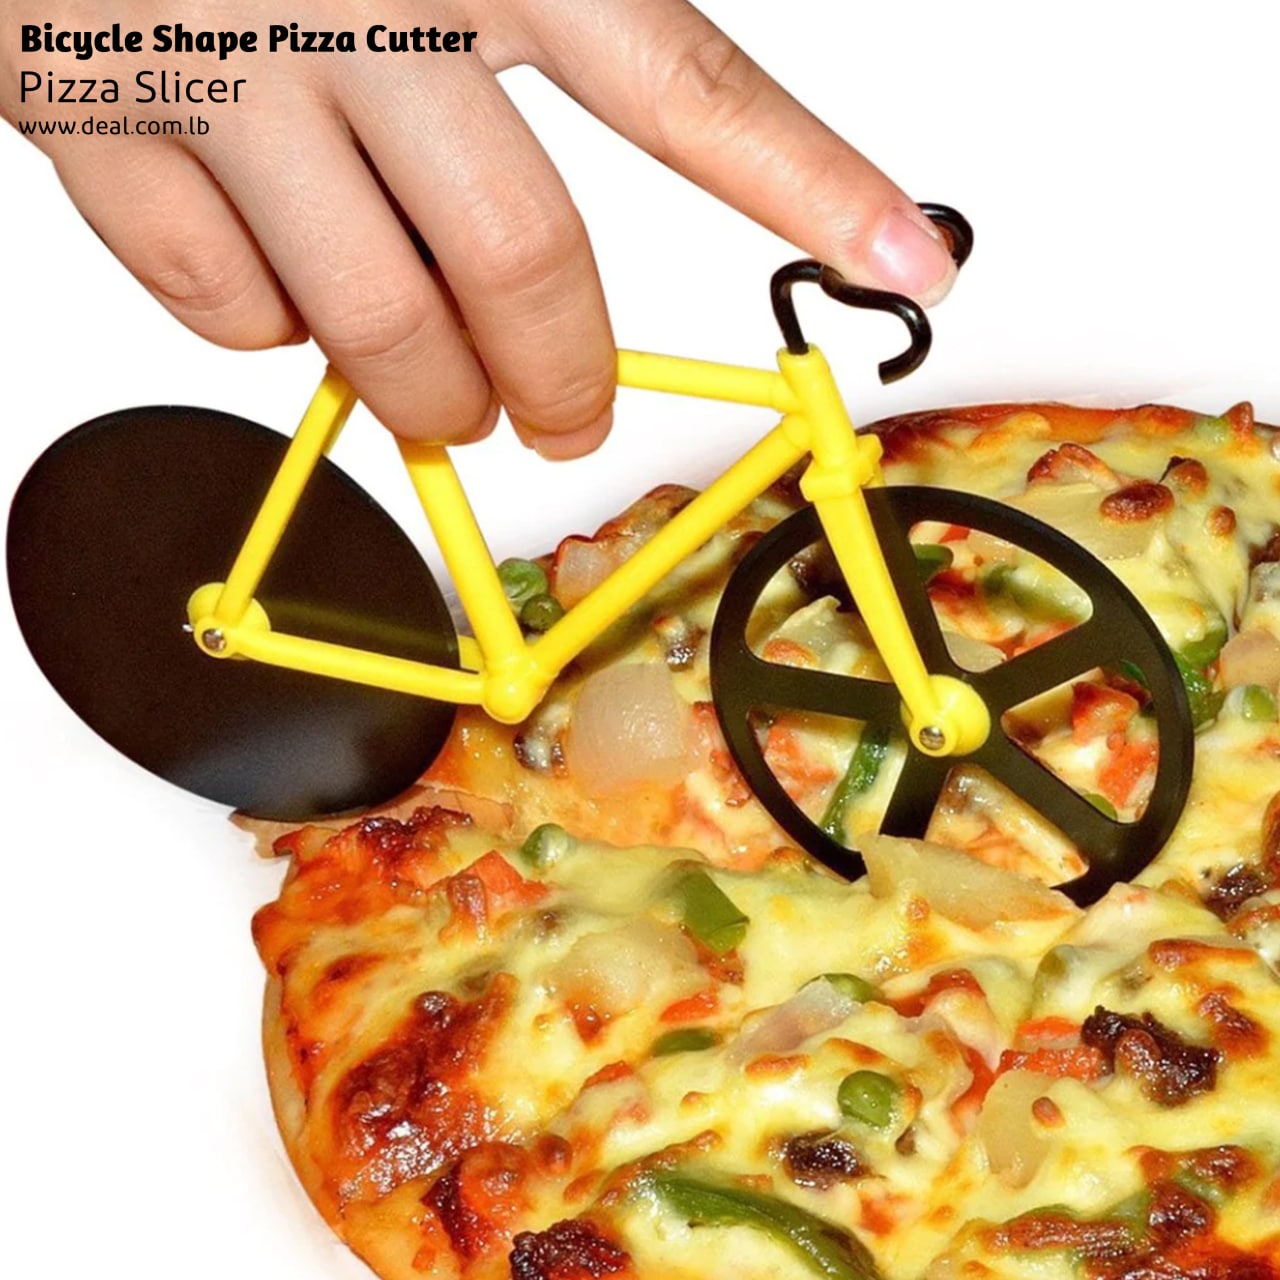 Bicycle Shape Pizza Cutter | Pizza Slicer